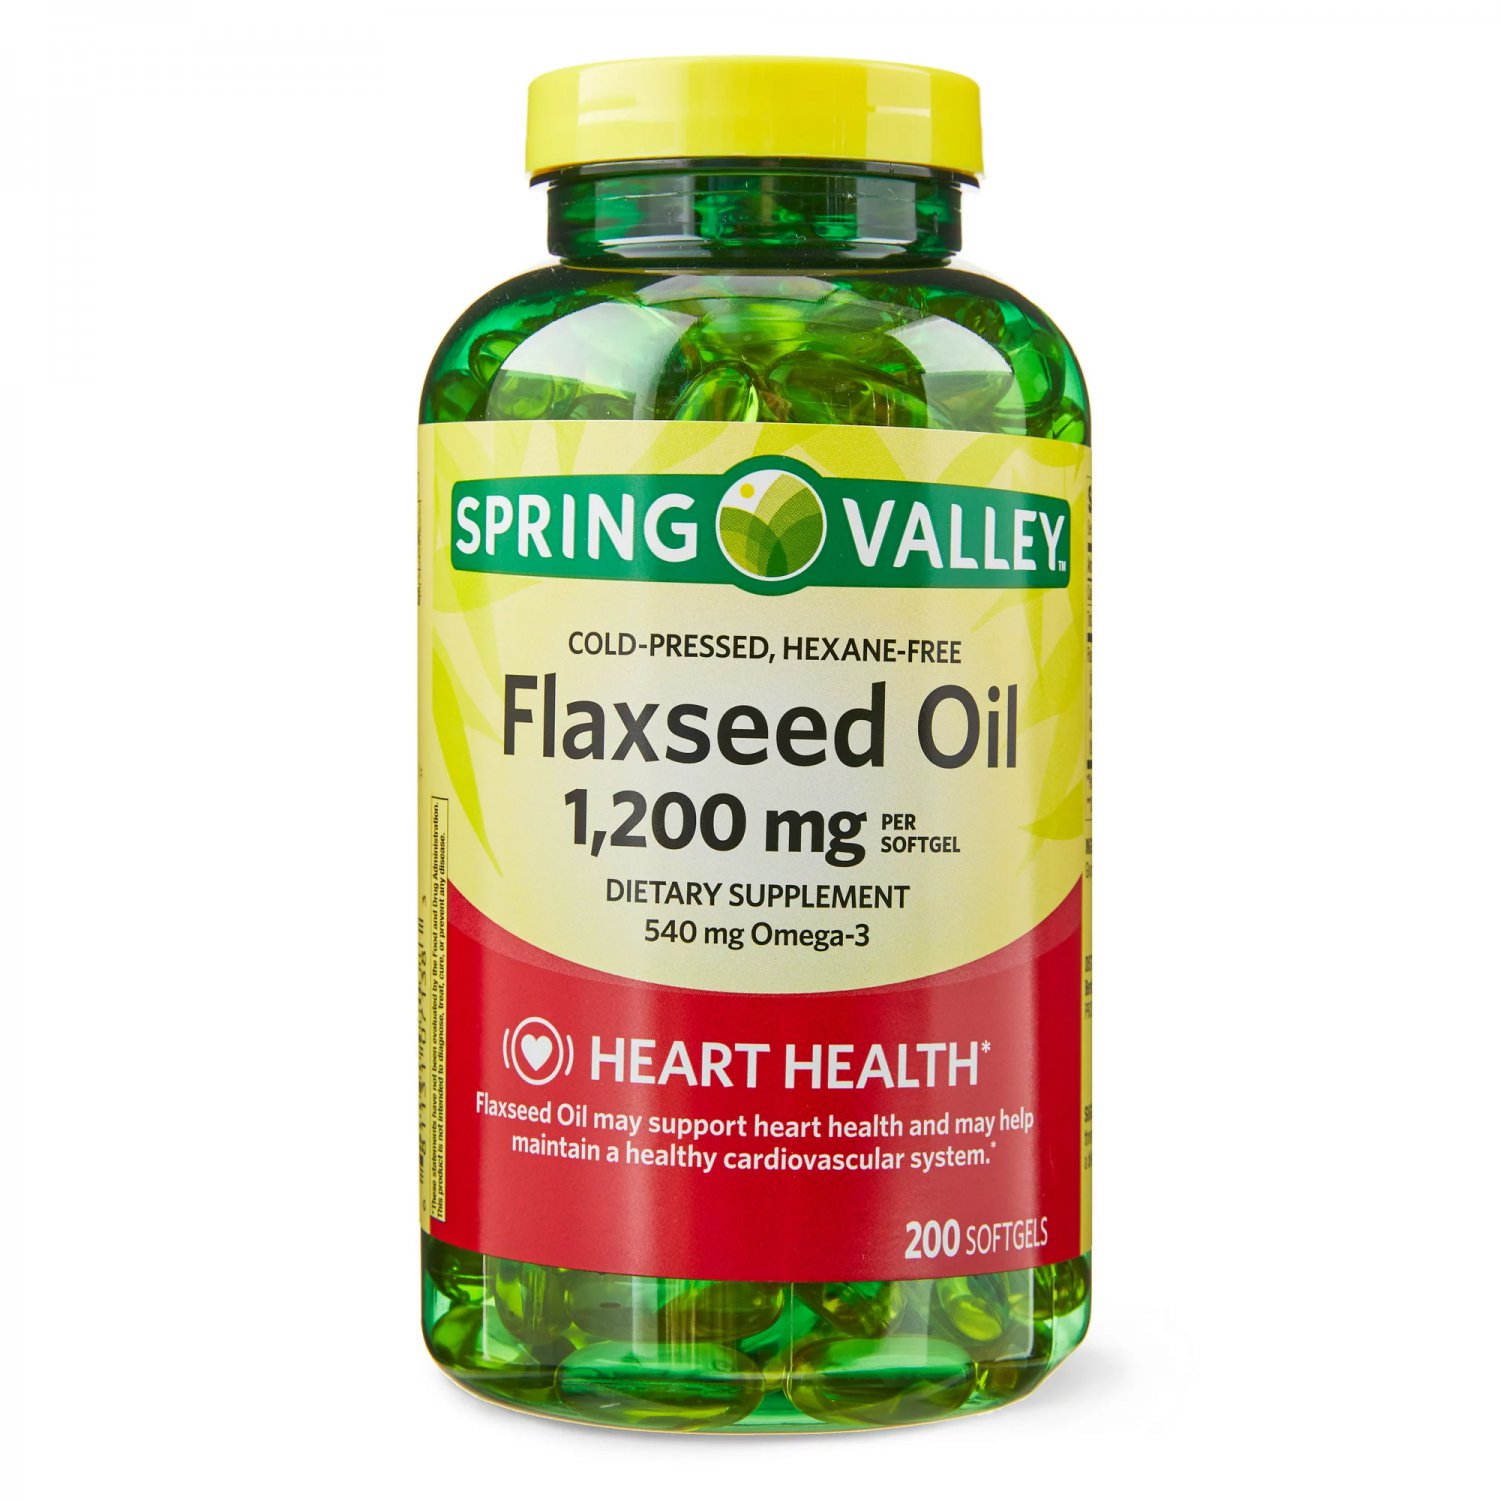 Spring Valley Flaxseed Oil Heart health, 1000 mg Dietary Supplement 200 Softgels